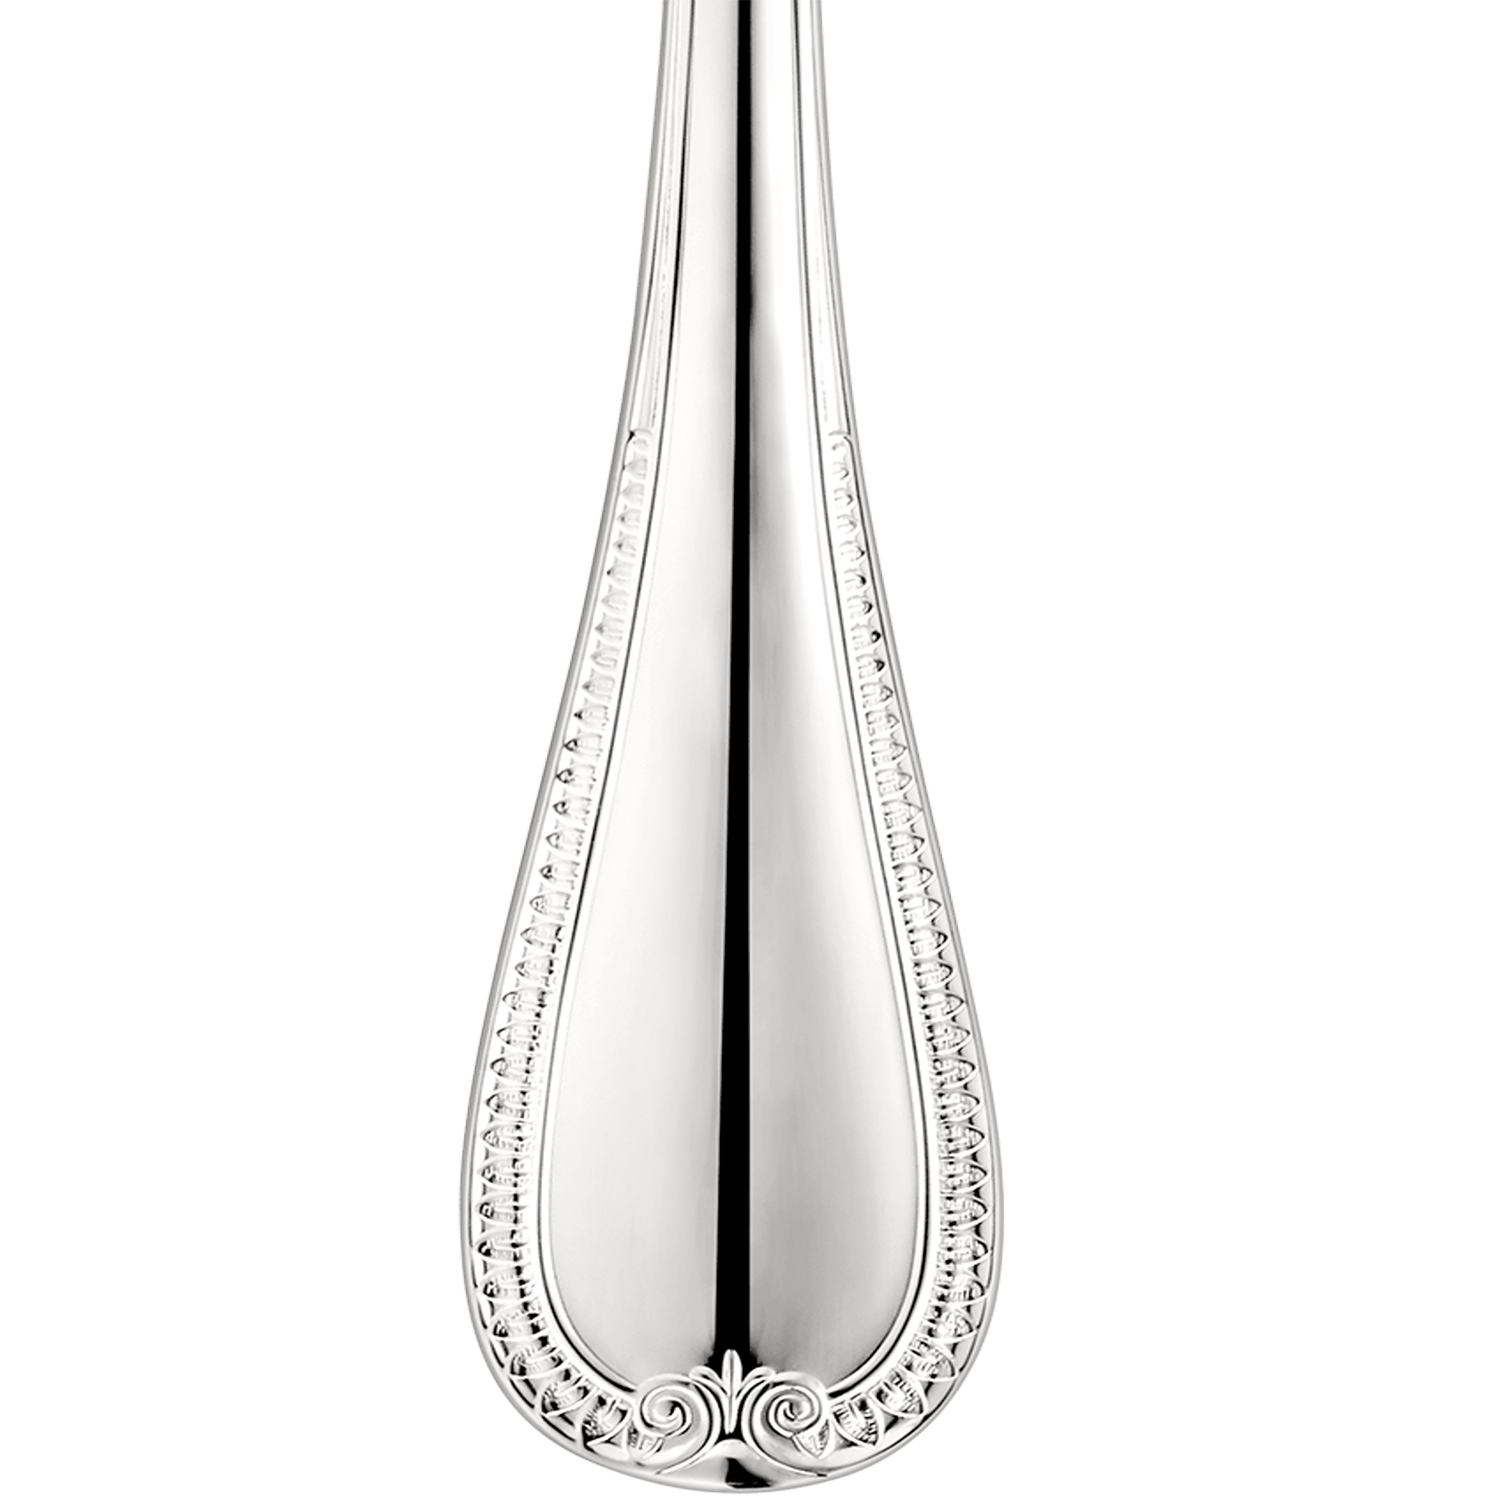 Silver-Plated serving ladle